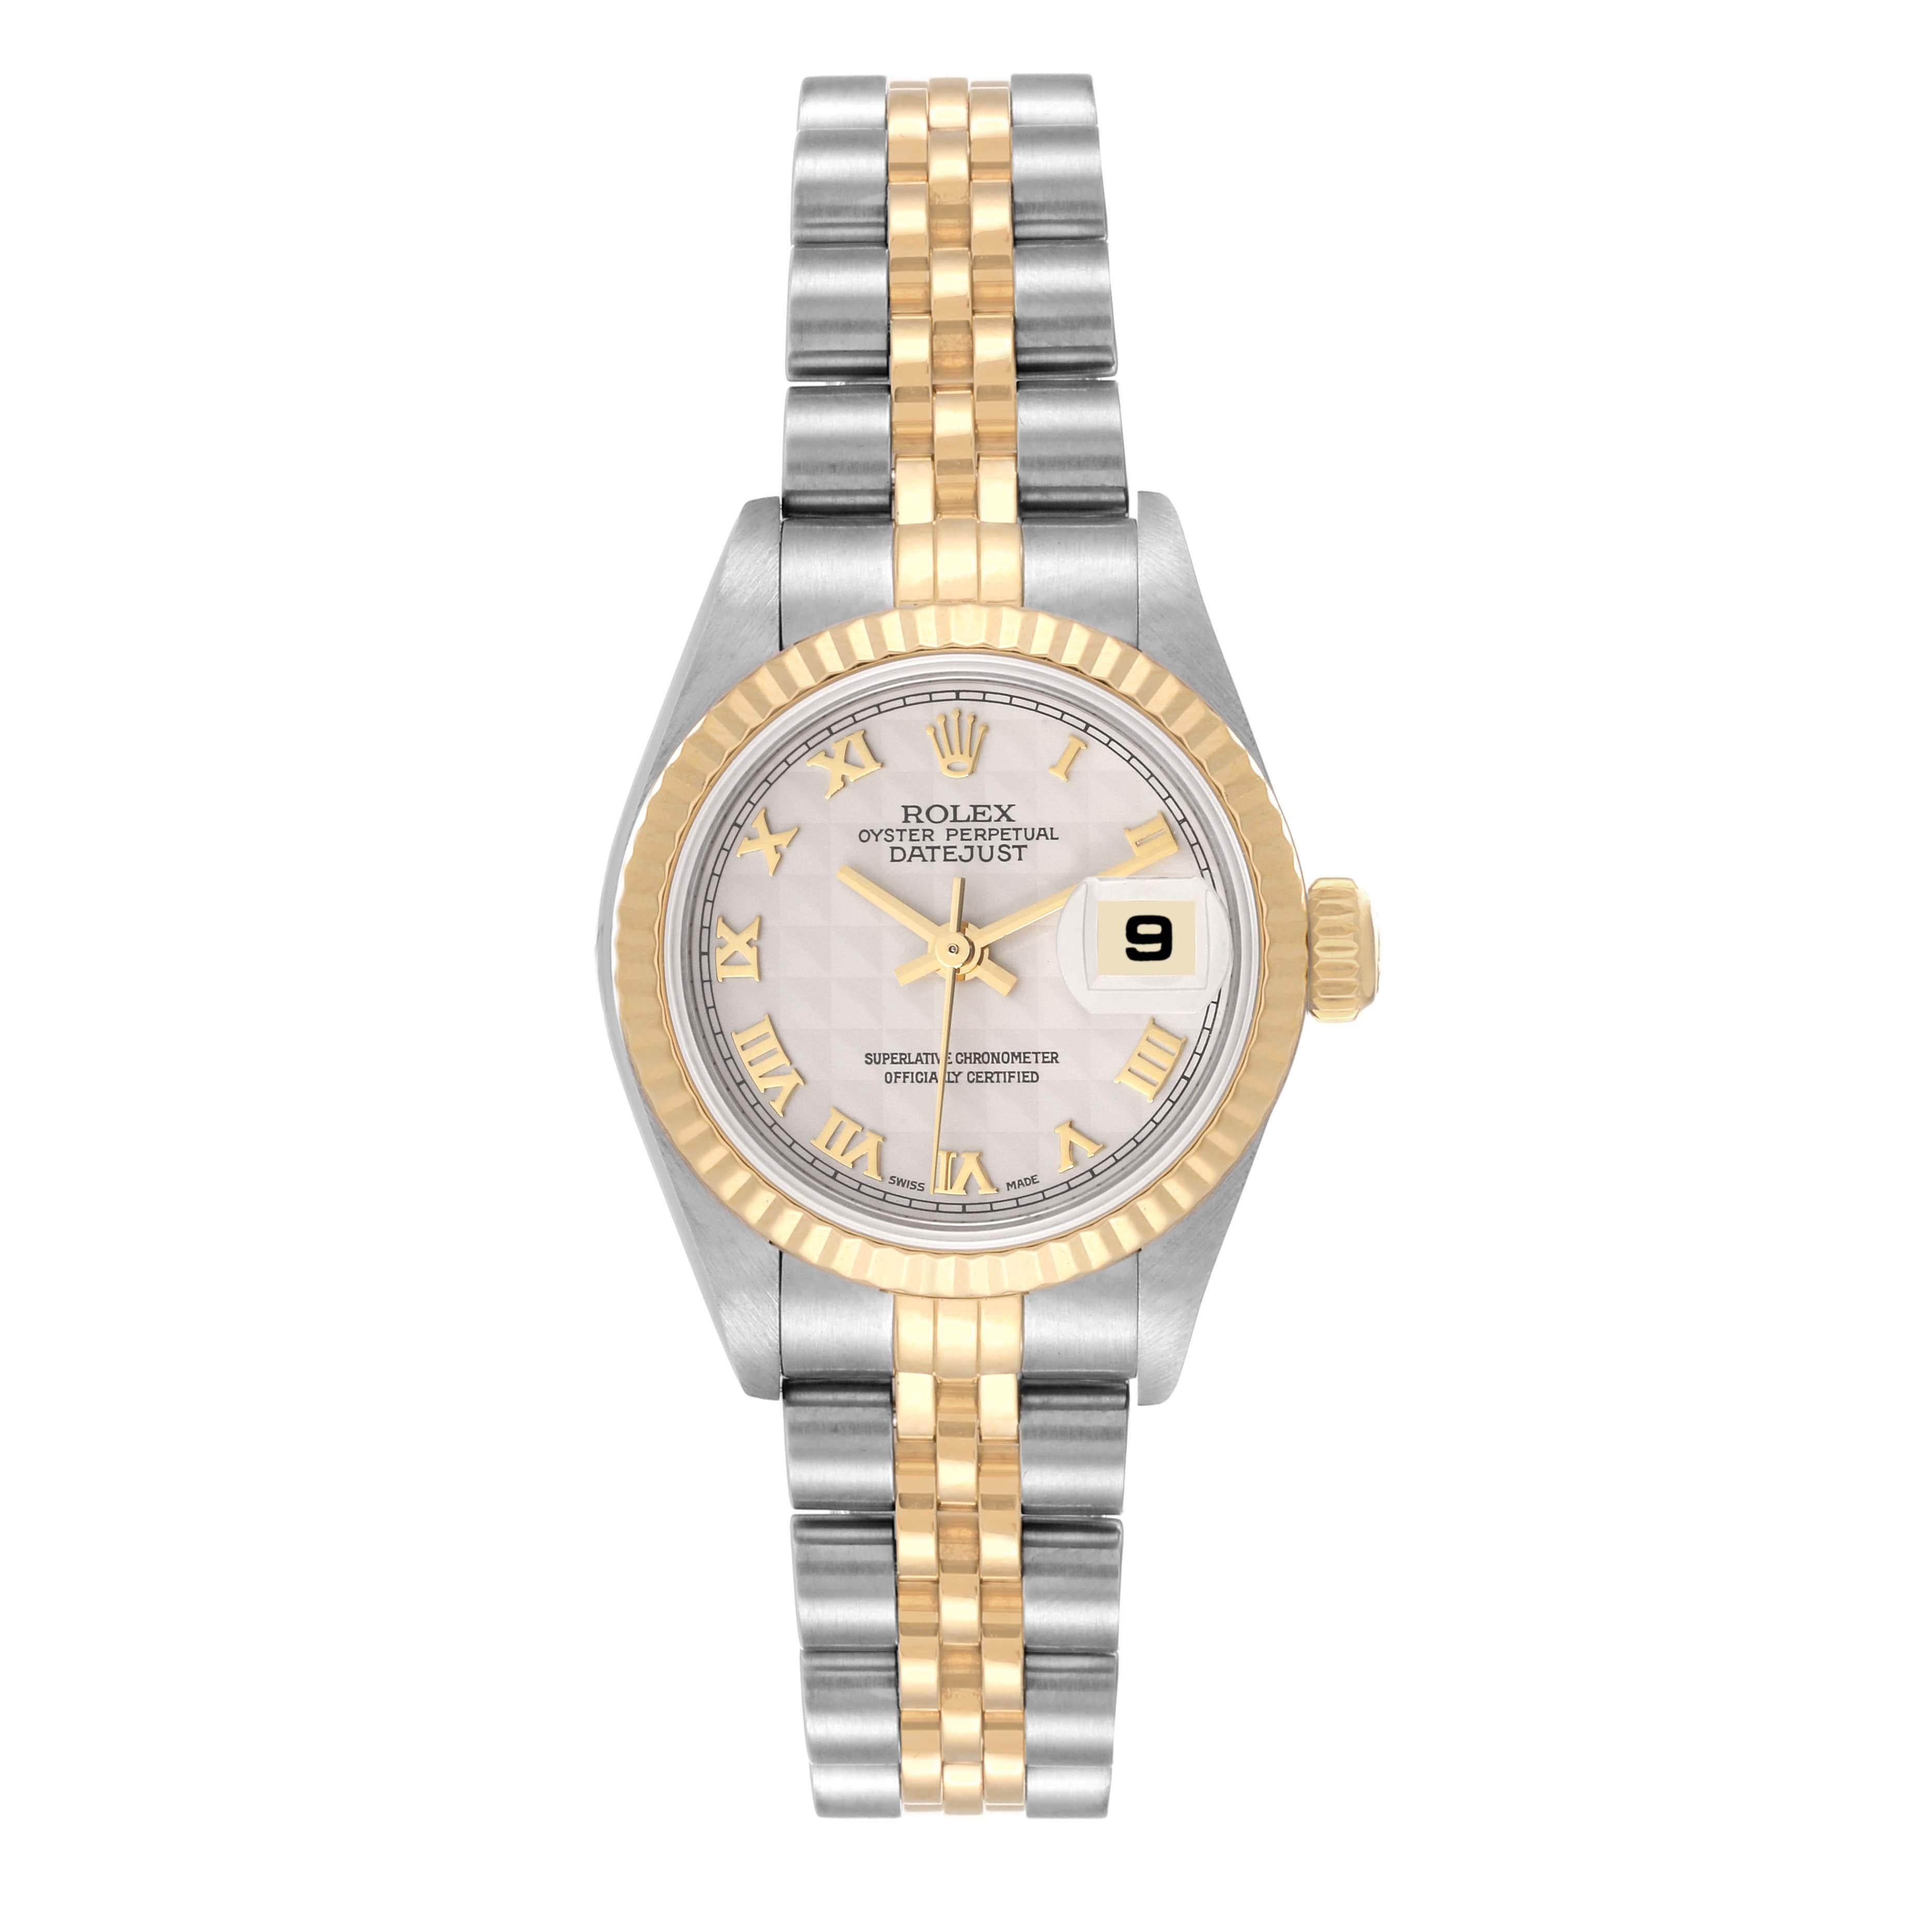 Rolex Datejust Steel Yellow Gold Ivory Pyramid Dial Ladies Watch 79173. Officially certified chronometer automatic self-winding movement. Stainless steel oyster case 26 mm in diameter. Rolex logo on an 18K yellow gold crown. 18k yellow gold fluted